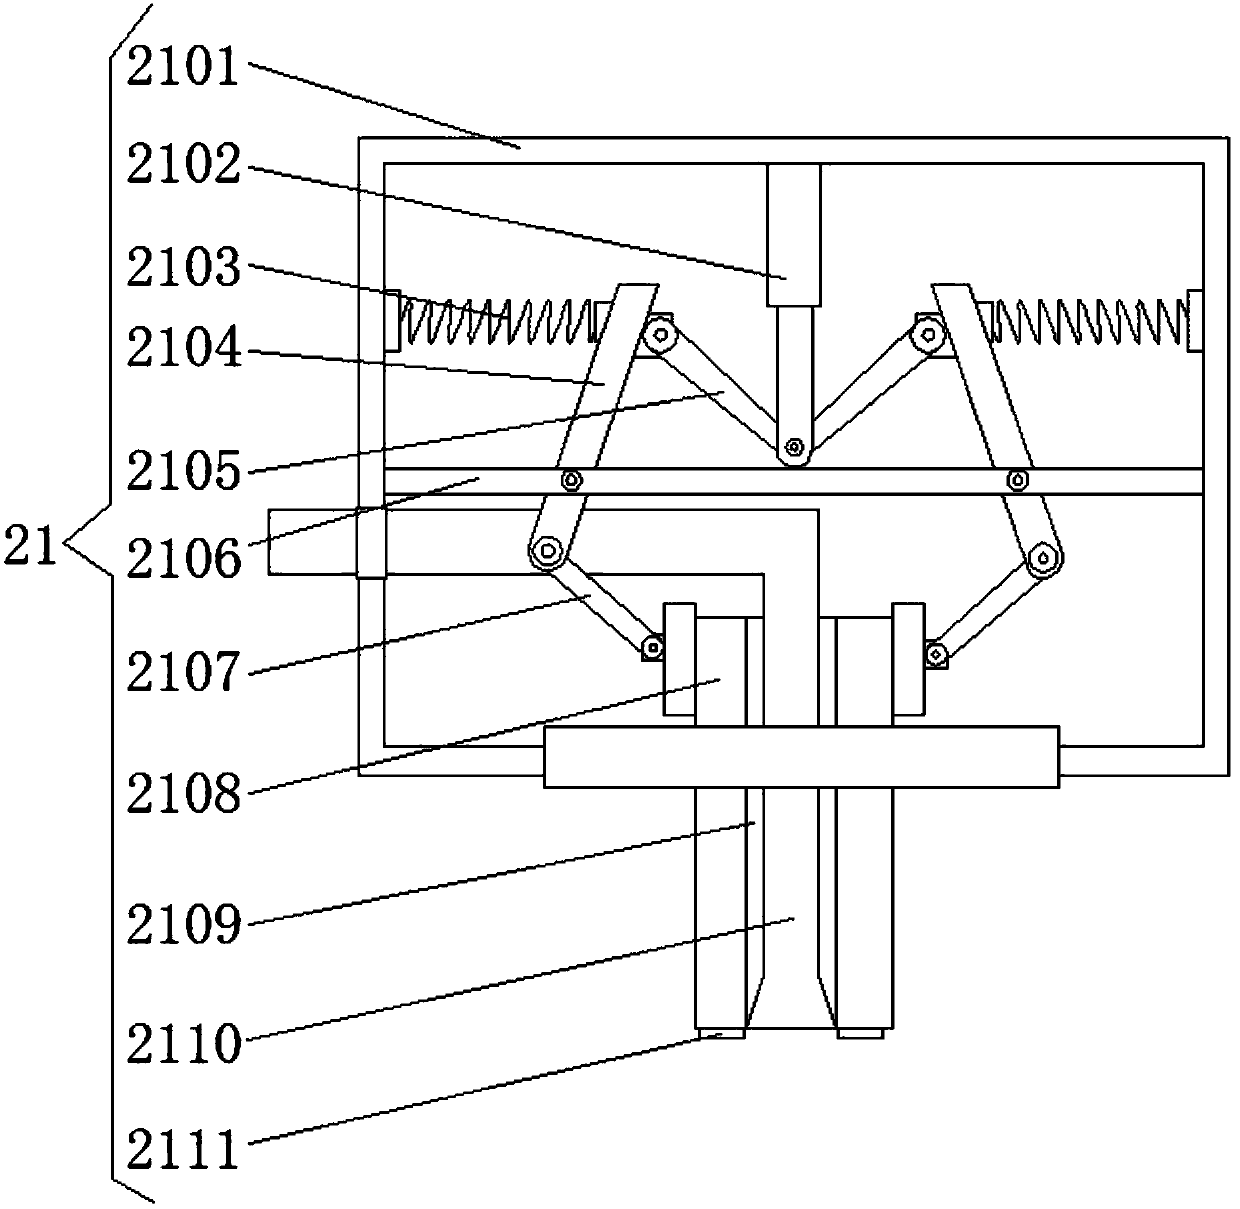 Connecting device for nylon ribbons